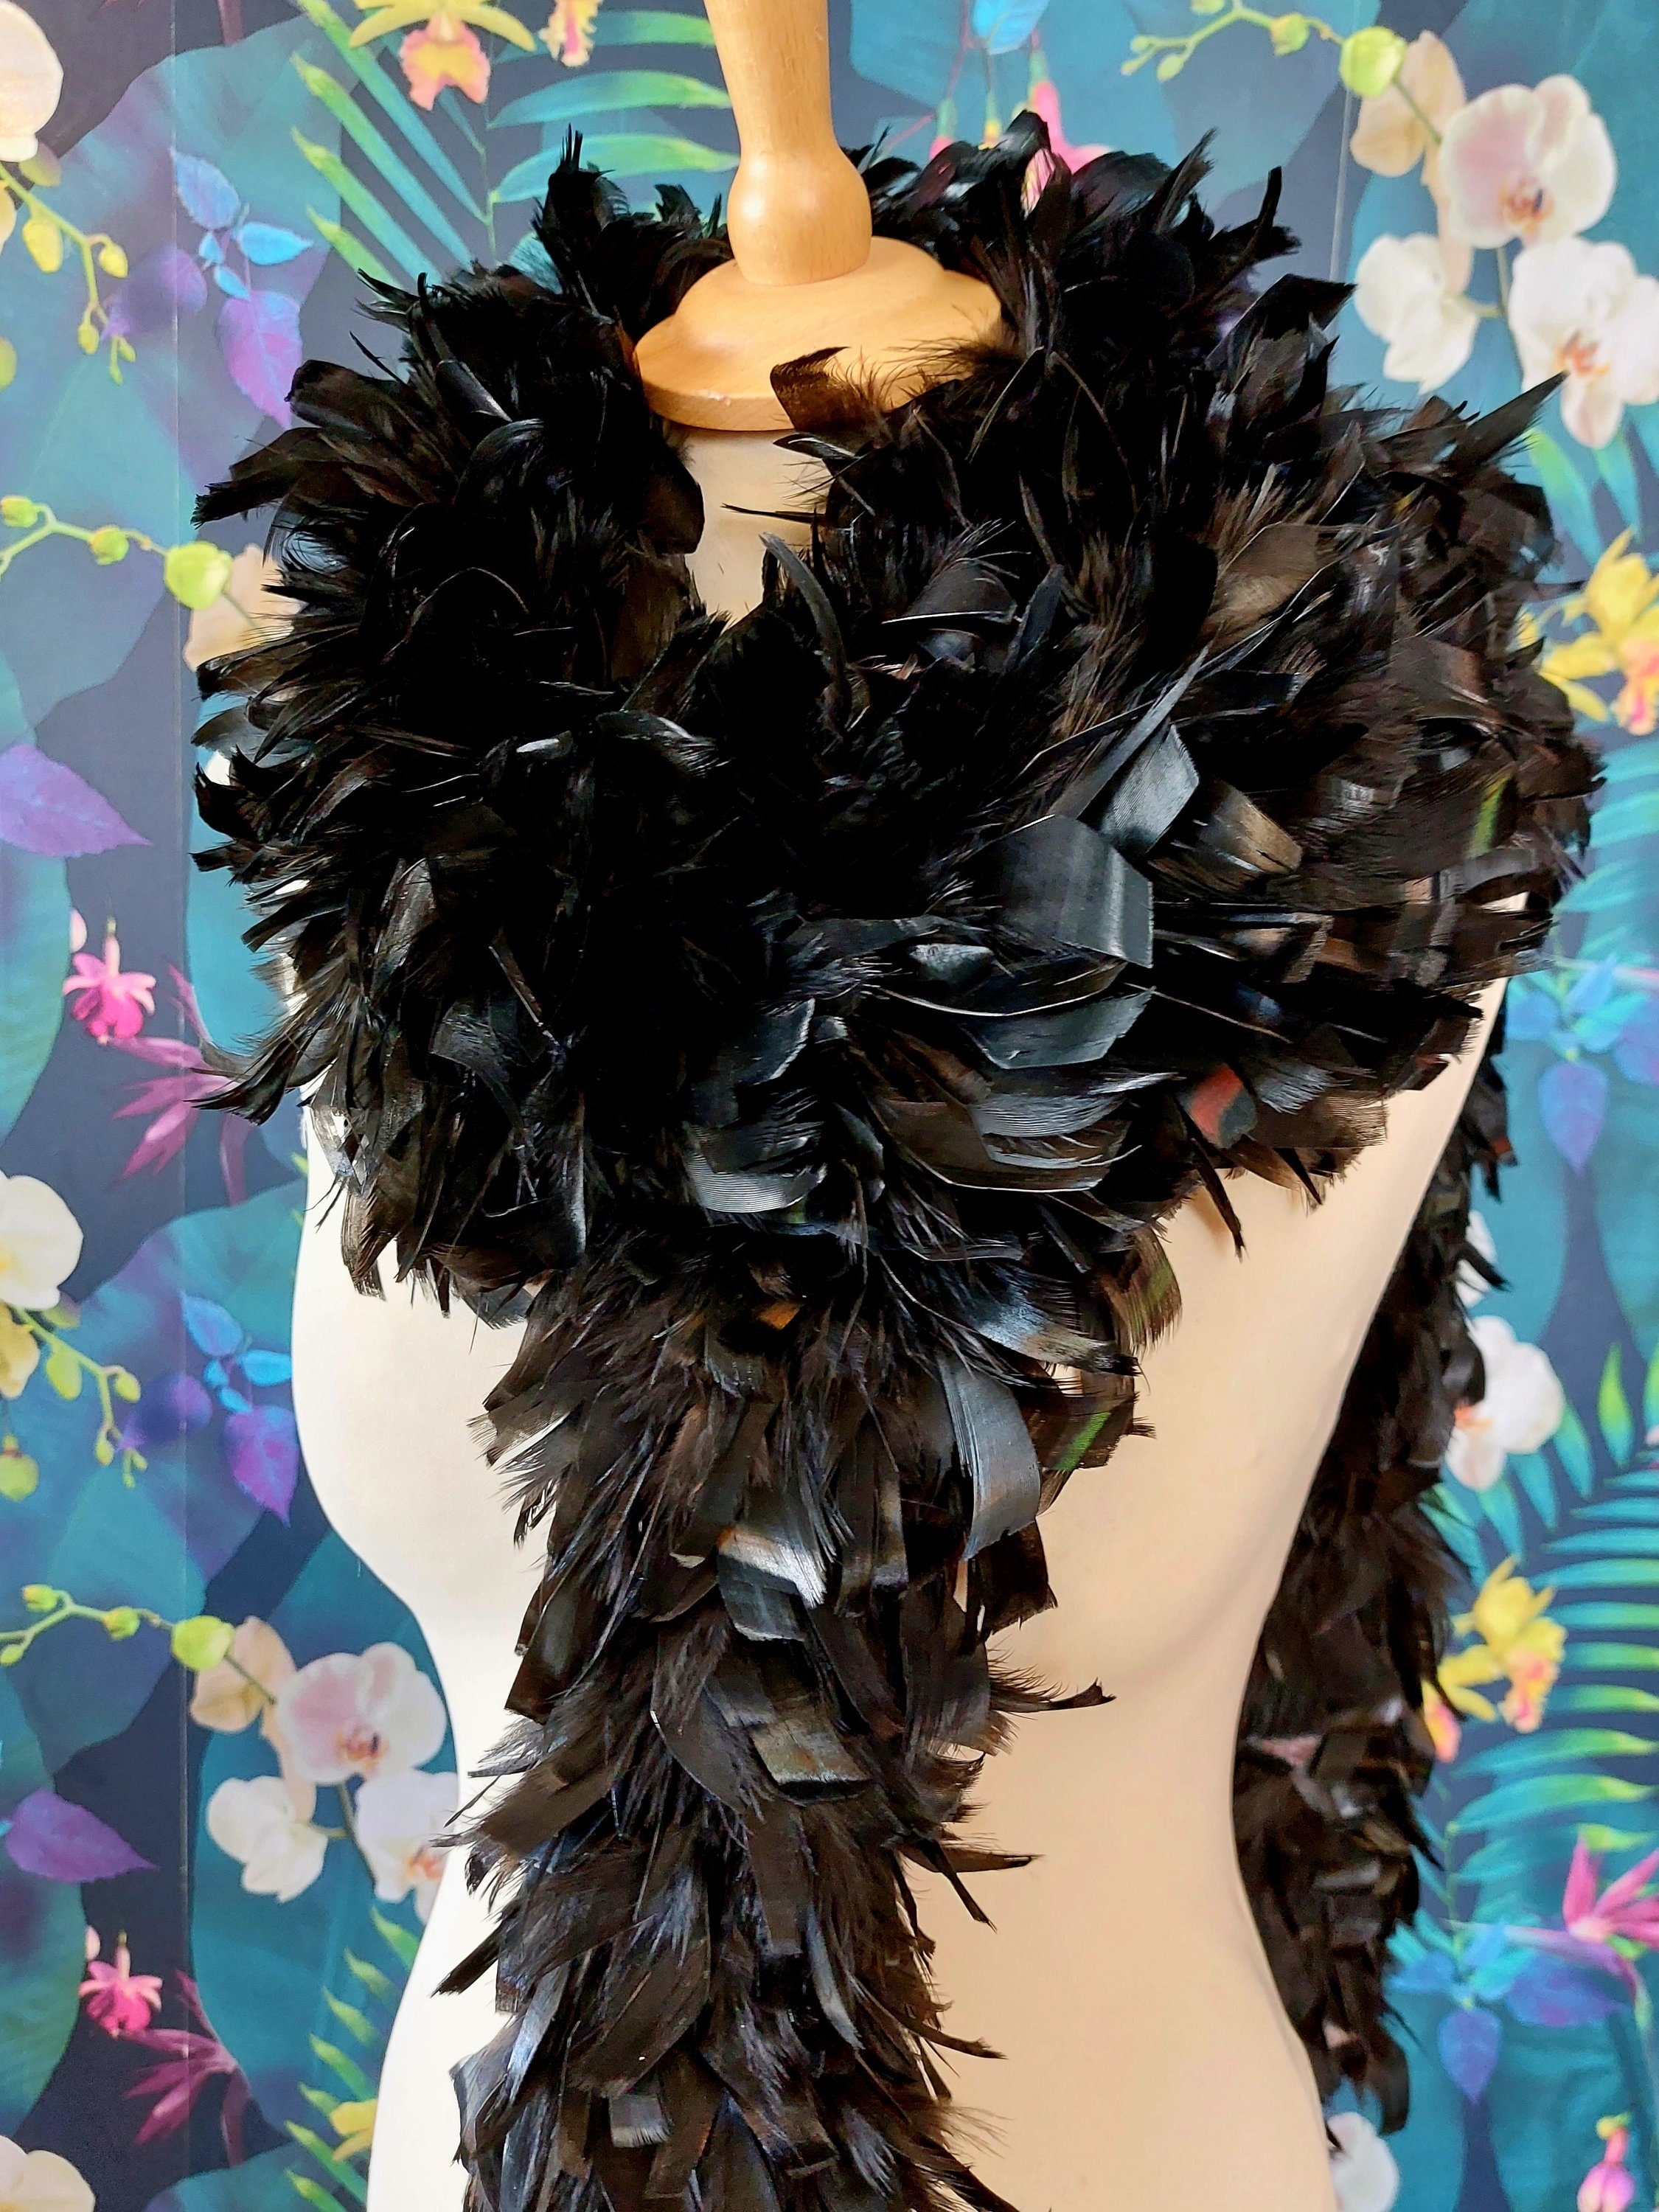 1pc Black Feather Boas, 6ft 40 Gram Feather Boa For Women For Carnival  Bachelor Dancing Wedding Party Dress Up Costume